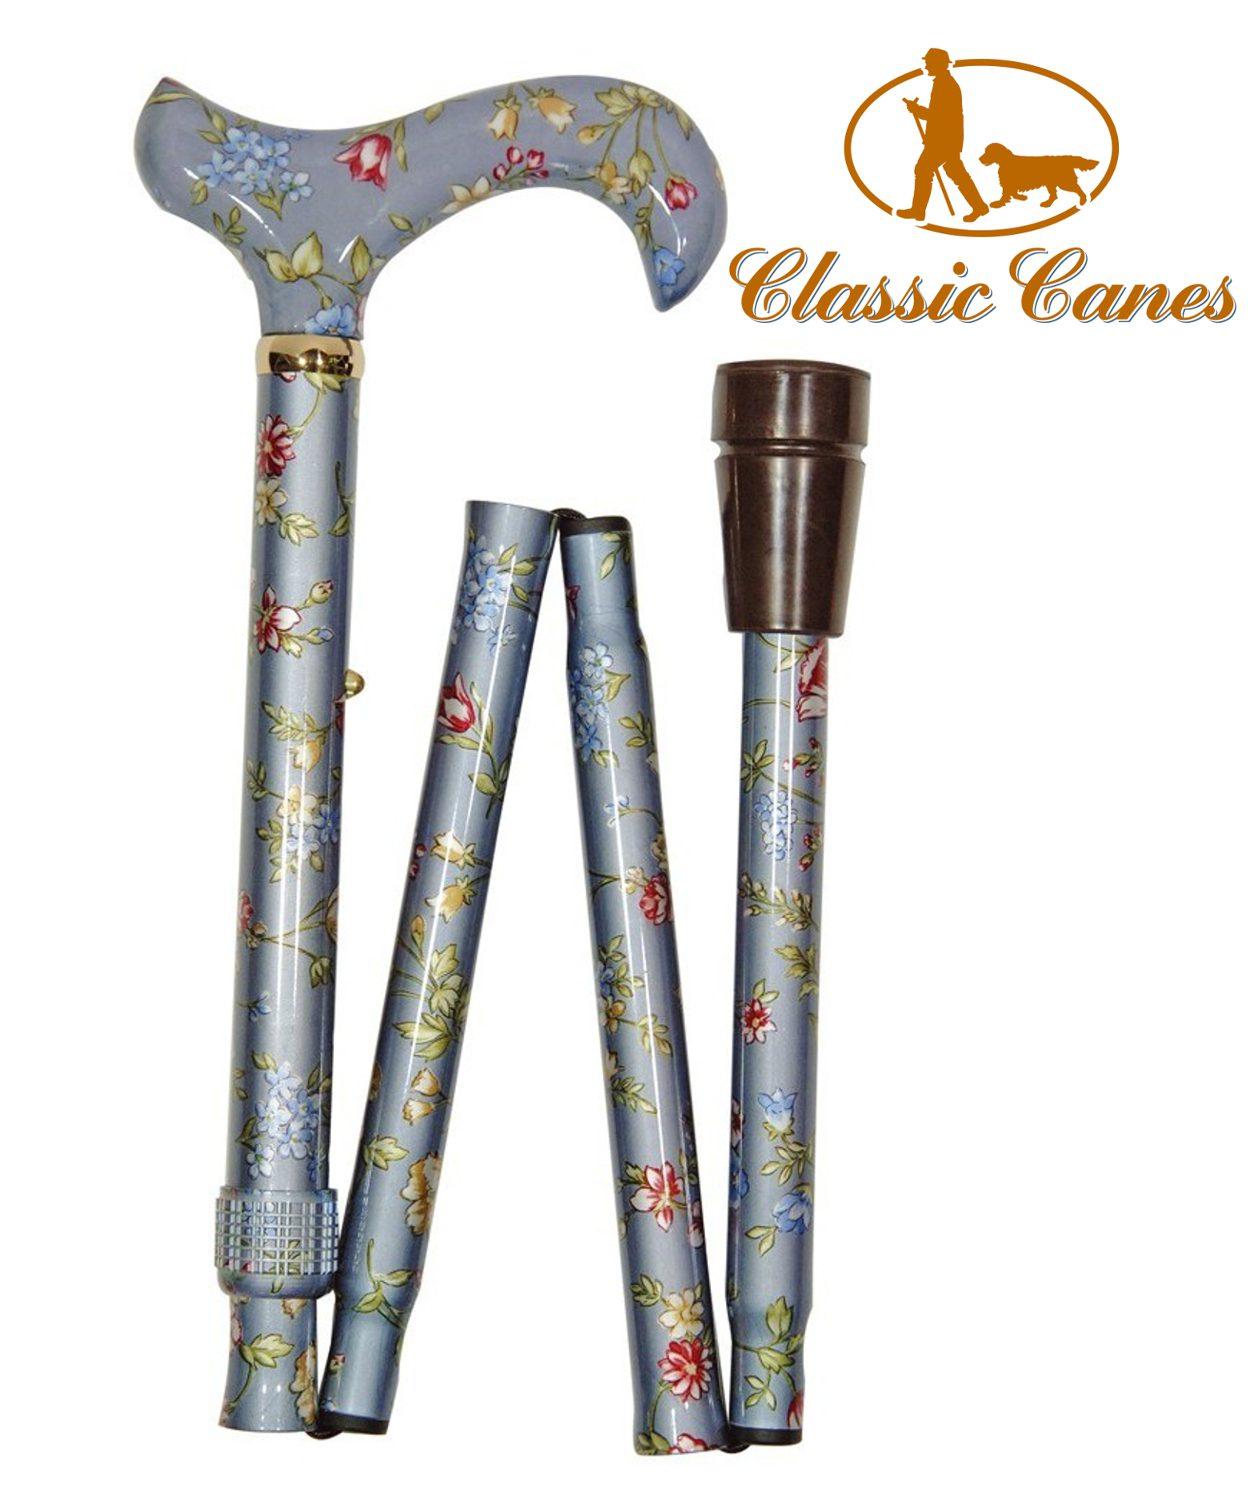 Light alloy adjustable walking stick with curve